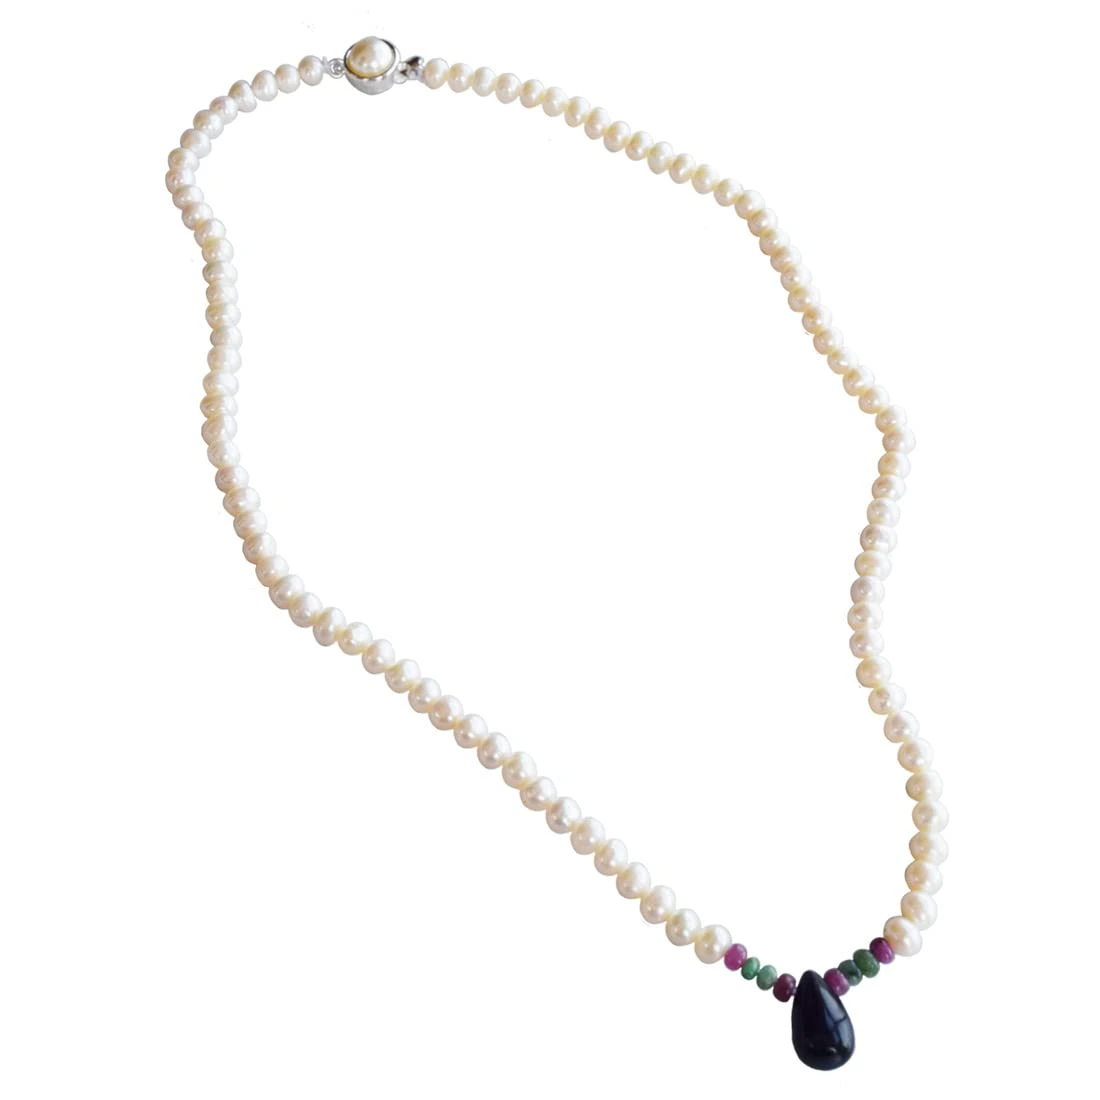 Drop Sapphire, Emerald, Ruby Beads & Rice Pearl Necklace